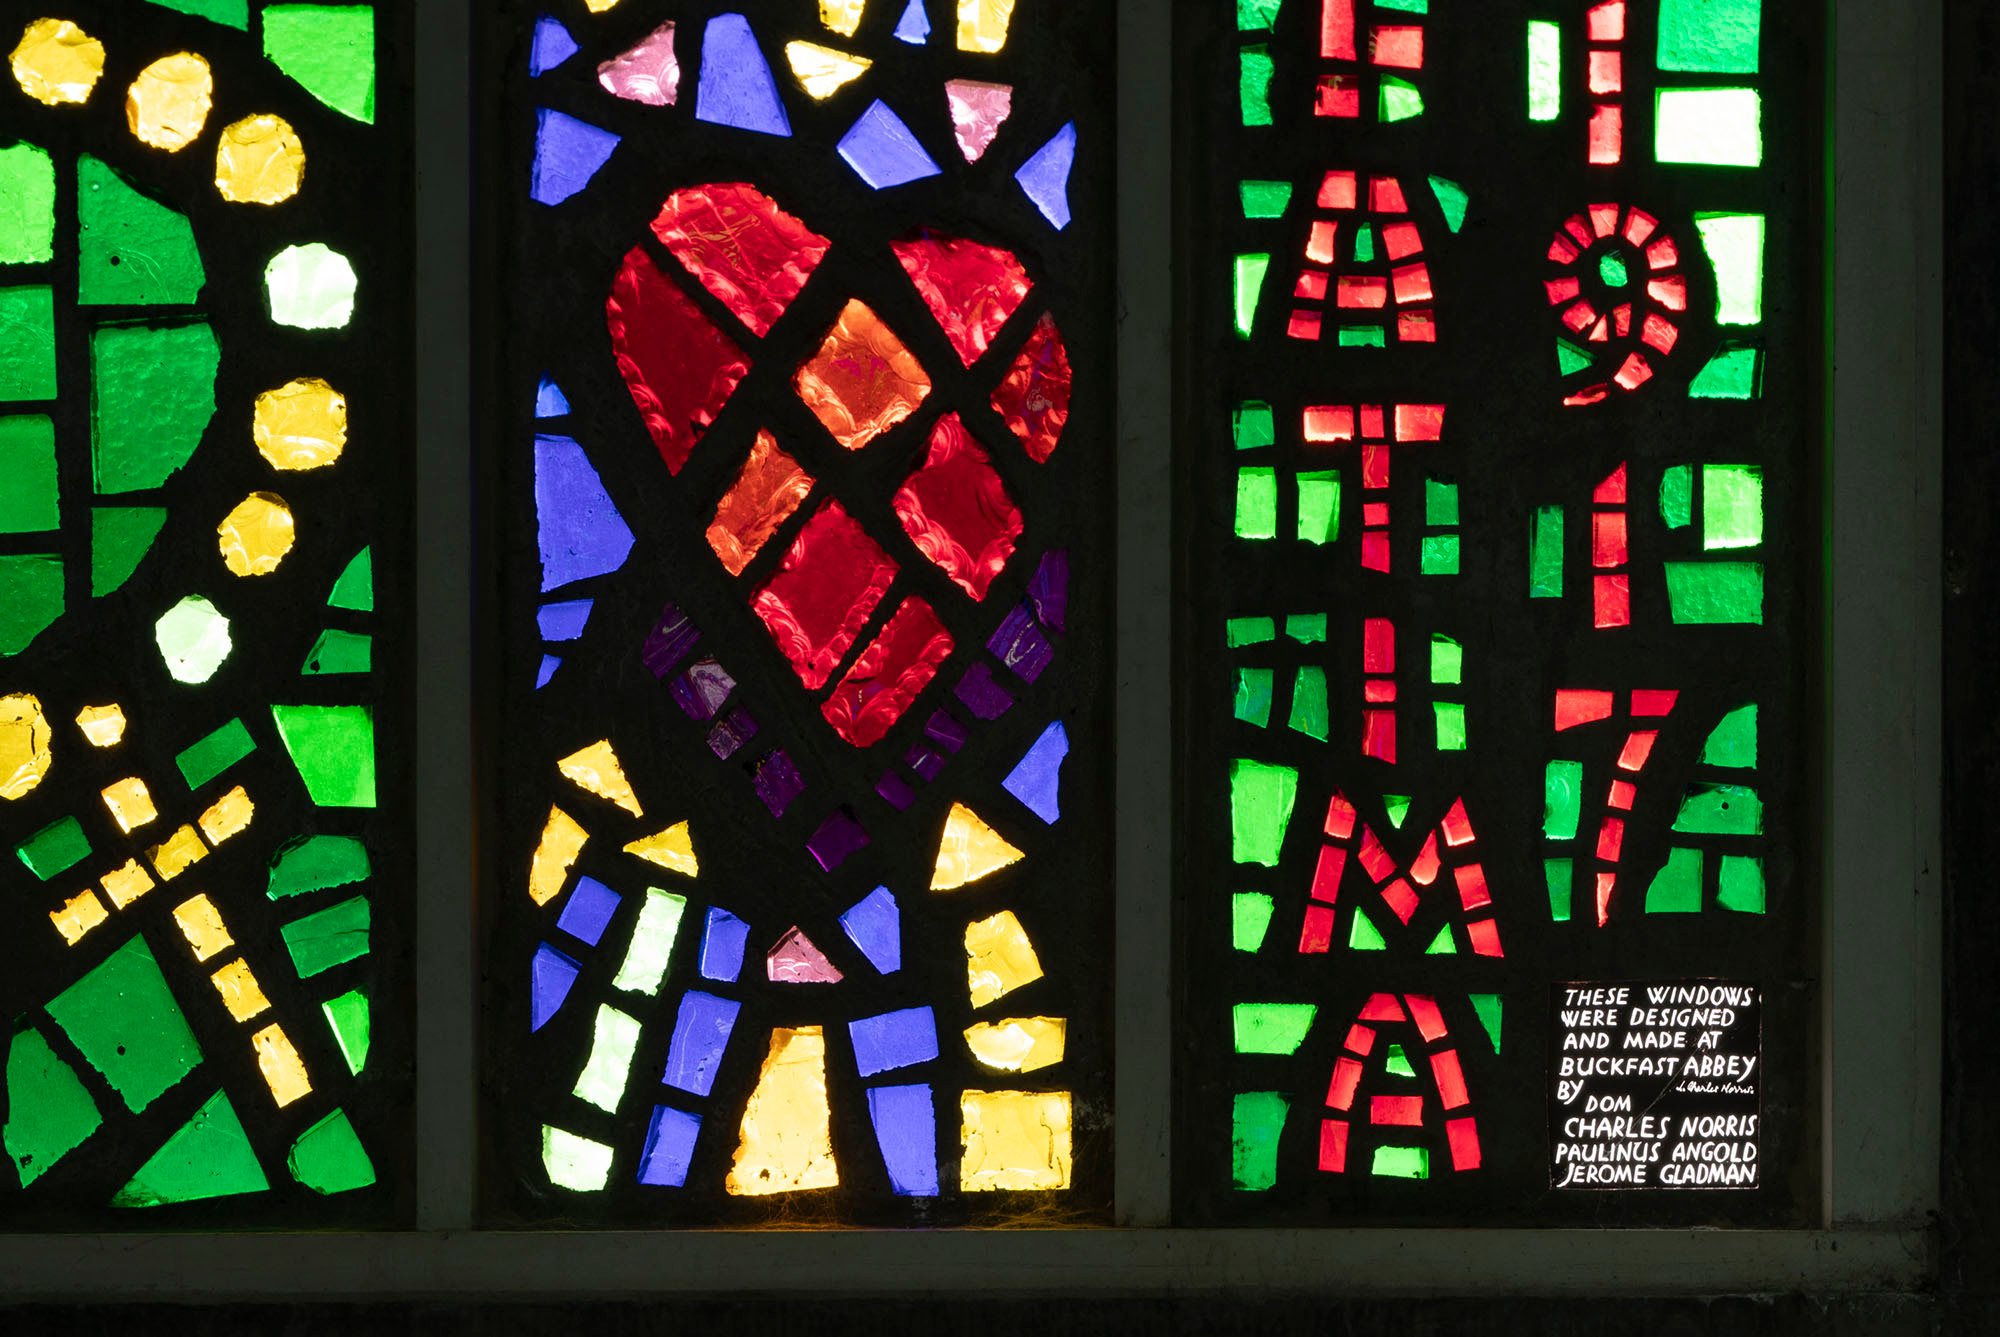 The photo shows three panels of chunky glass design, with vibrant red, green, yellow and blue in a black background, with a heart in the centre panel.